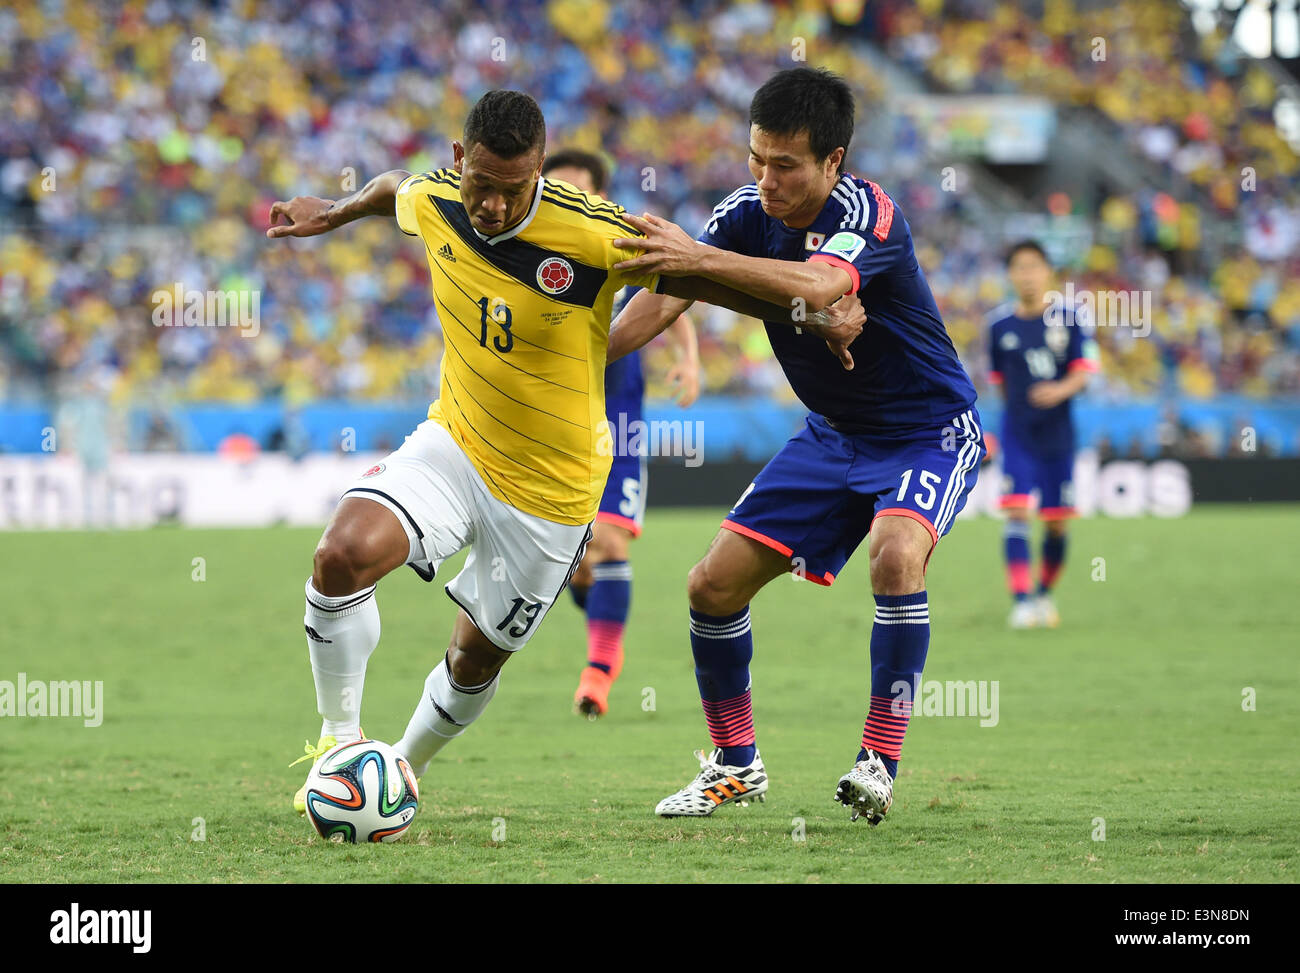 Cuiaba, Brazil. 24th June, 2014. Japan's Masahiko Inoha vies with Colombia's Freddy Guarin during a Group C match between Japan and Colombia of 2014 FIFA World Cup at the Arena Pantanal Stadium in Cuiaba, Brazil, June 24, 2014. © Liu Dawei/Xinhua/Alamy Live News Stock Photo